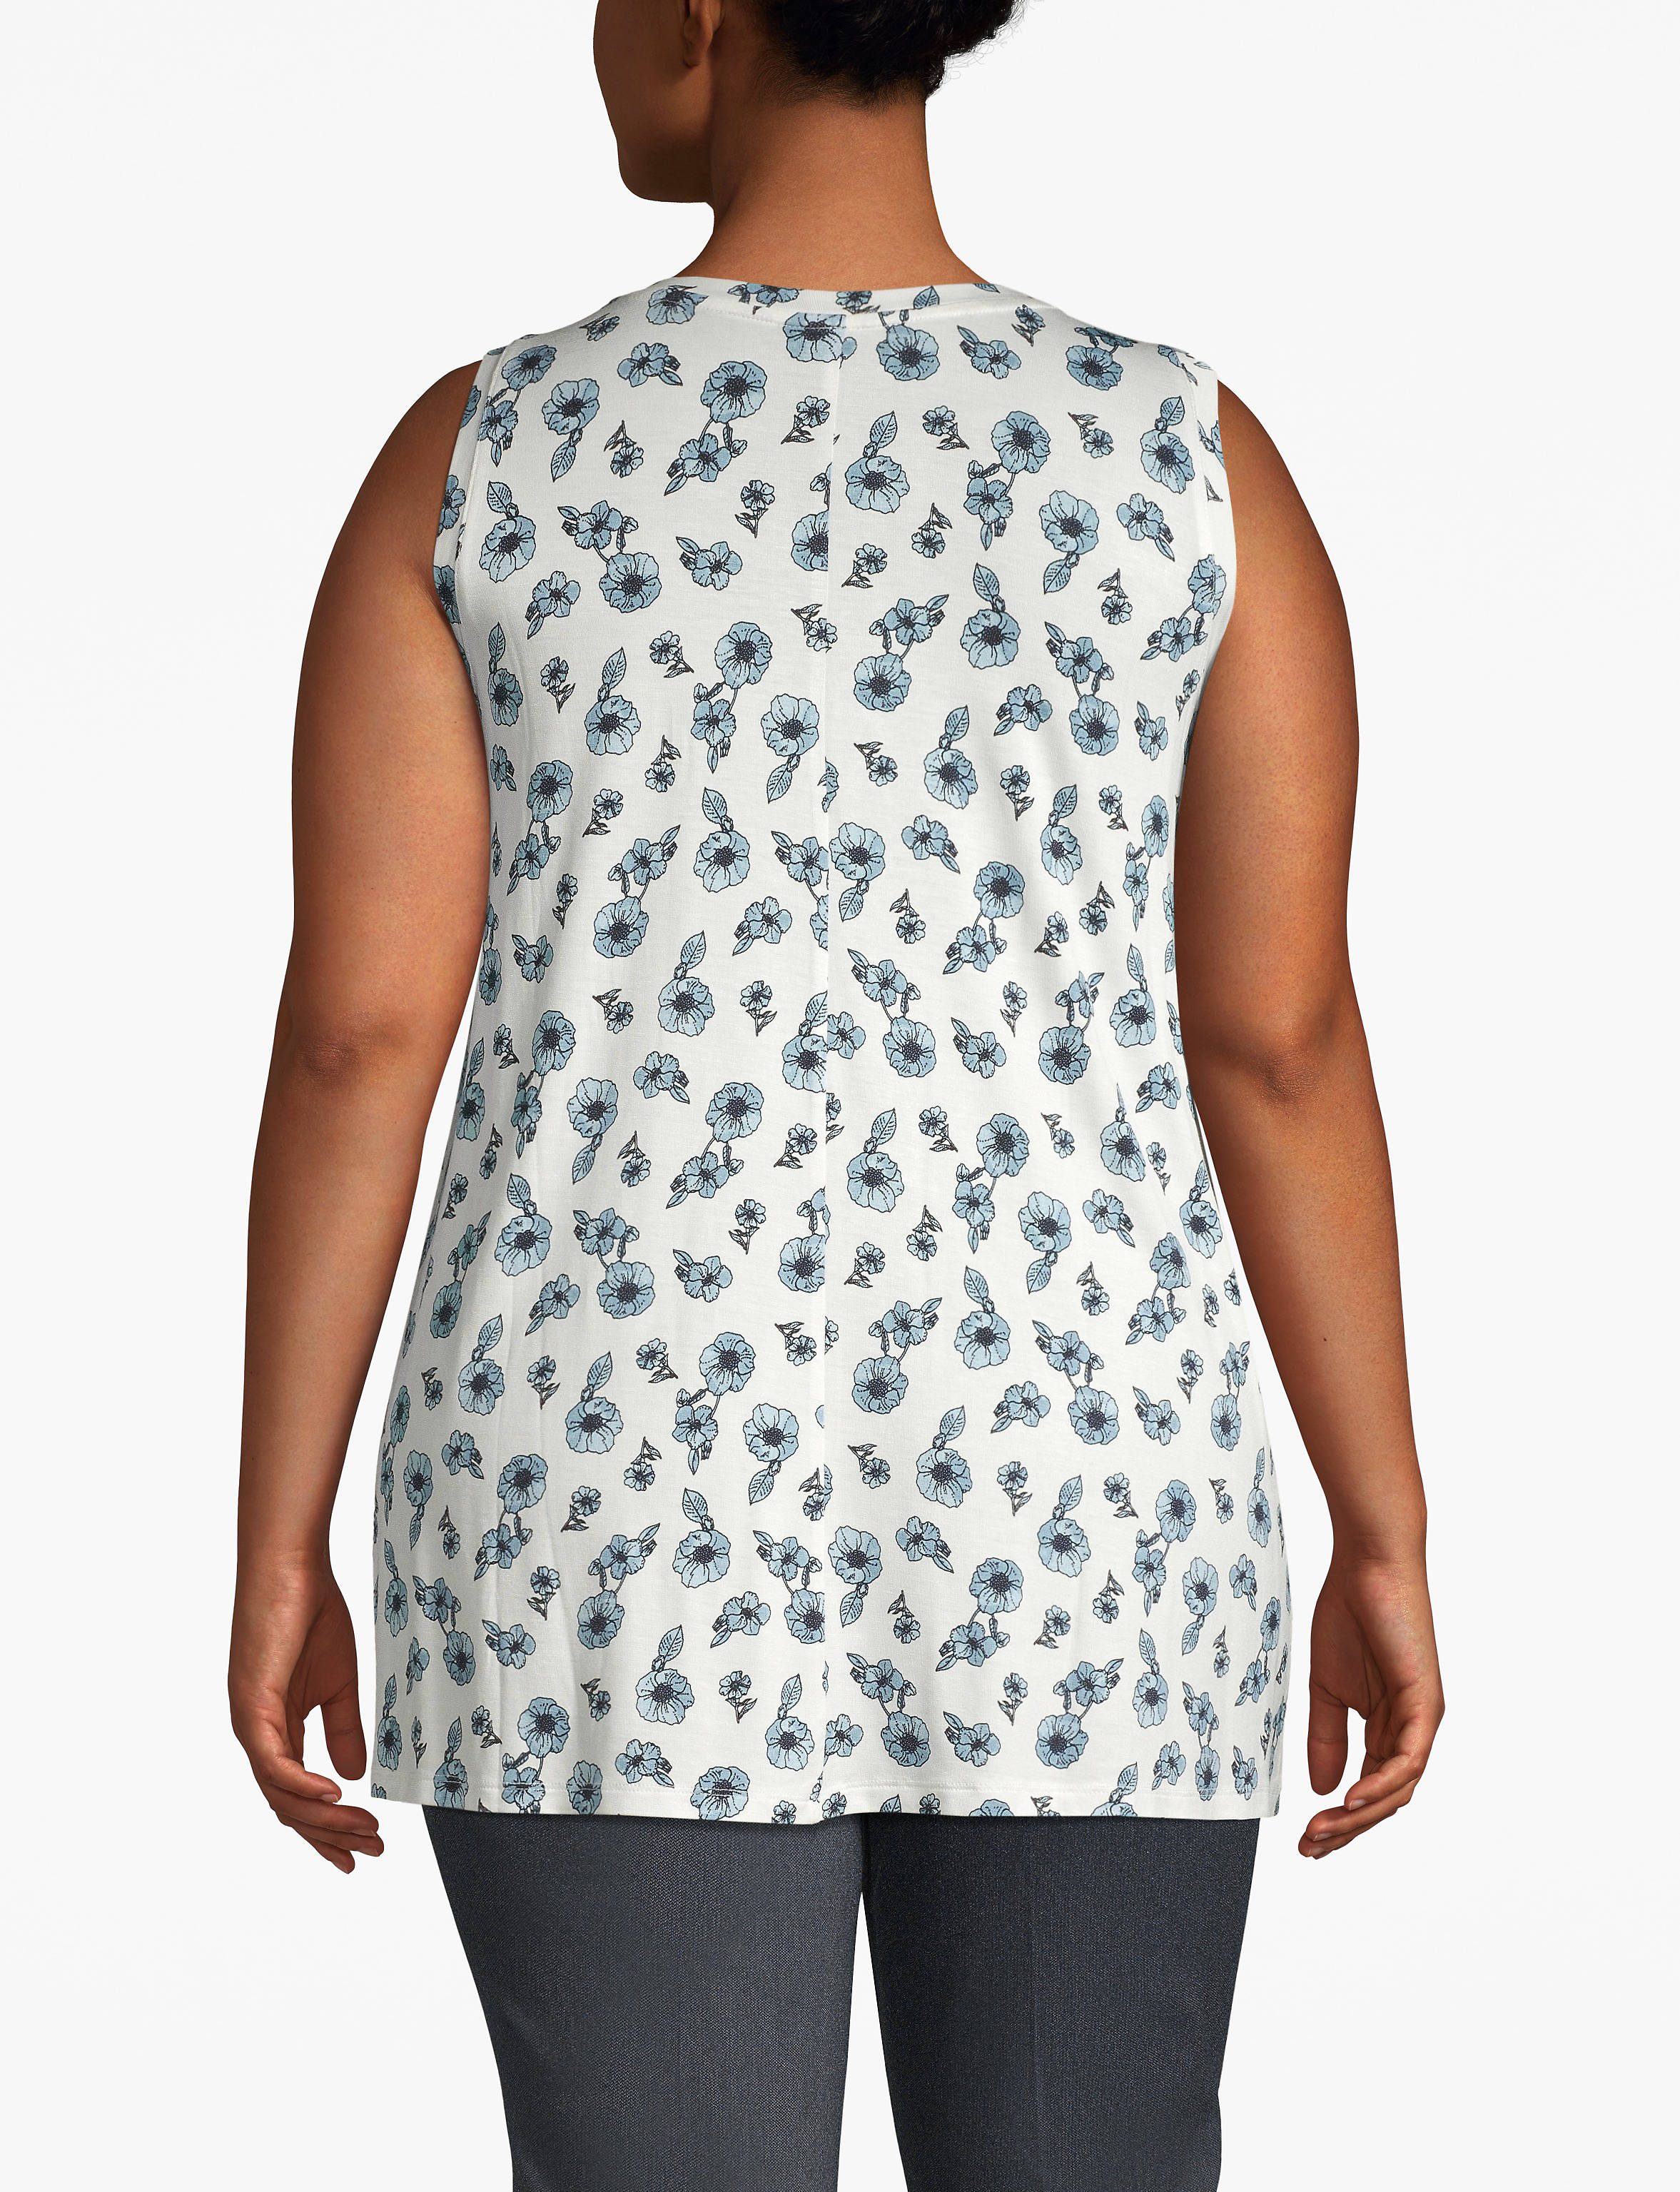 Sleeveless VNeck Swing Tank:LBF20030F_DitsyWatercolorFloral_colorway11:14/16 Product Image 2